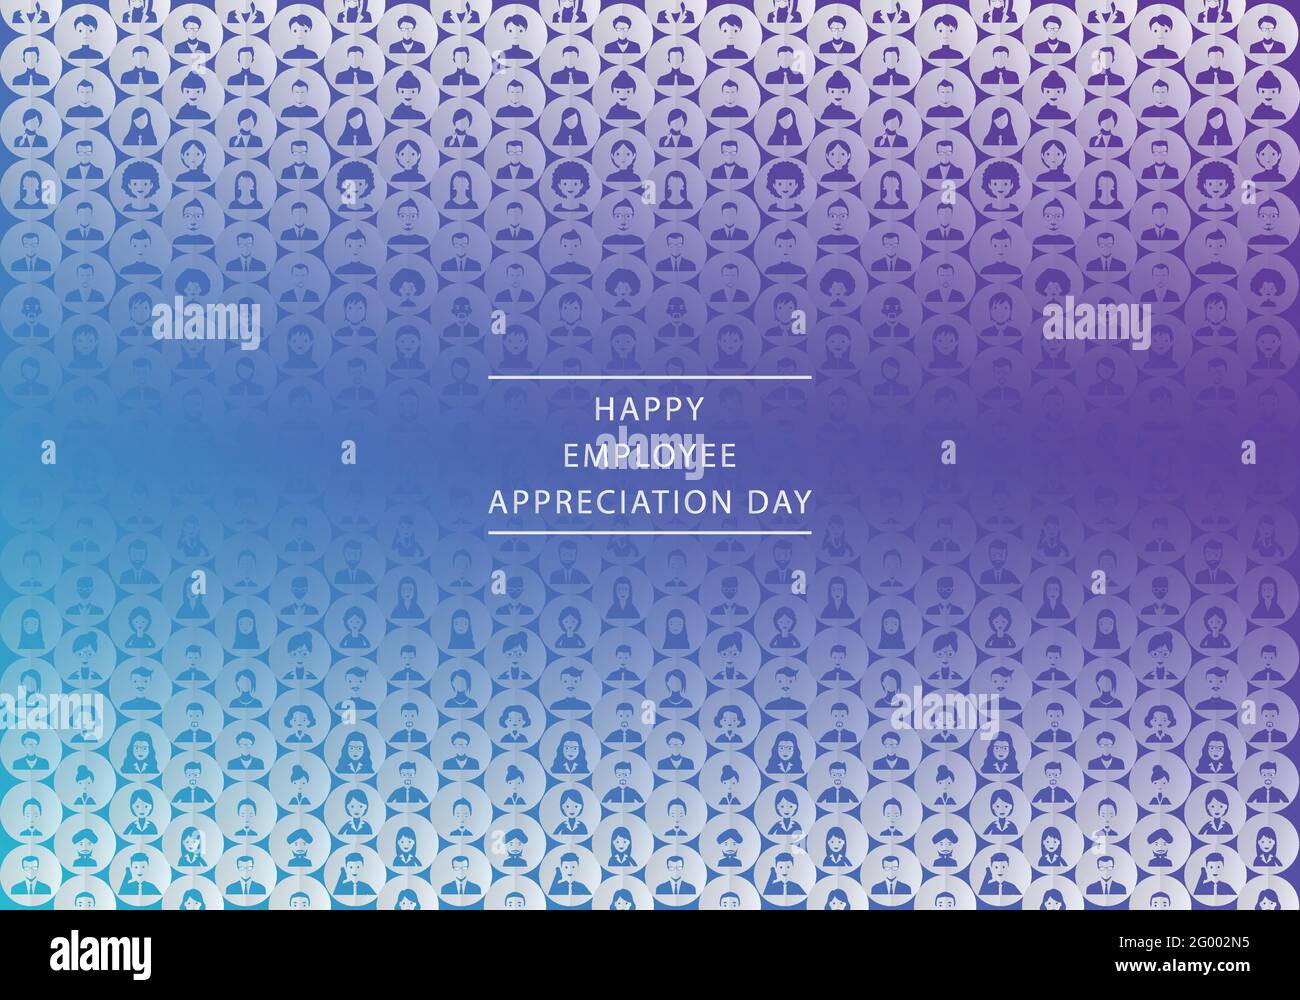 Happy Employee Appreciation Day Background Template Stock Vector